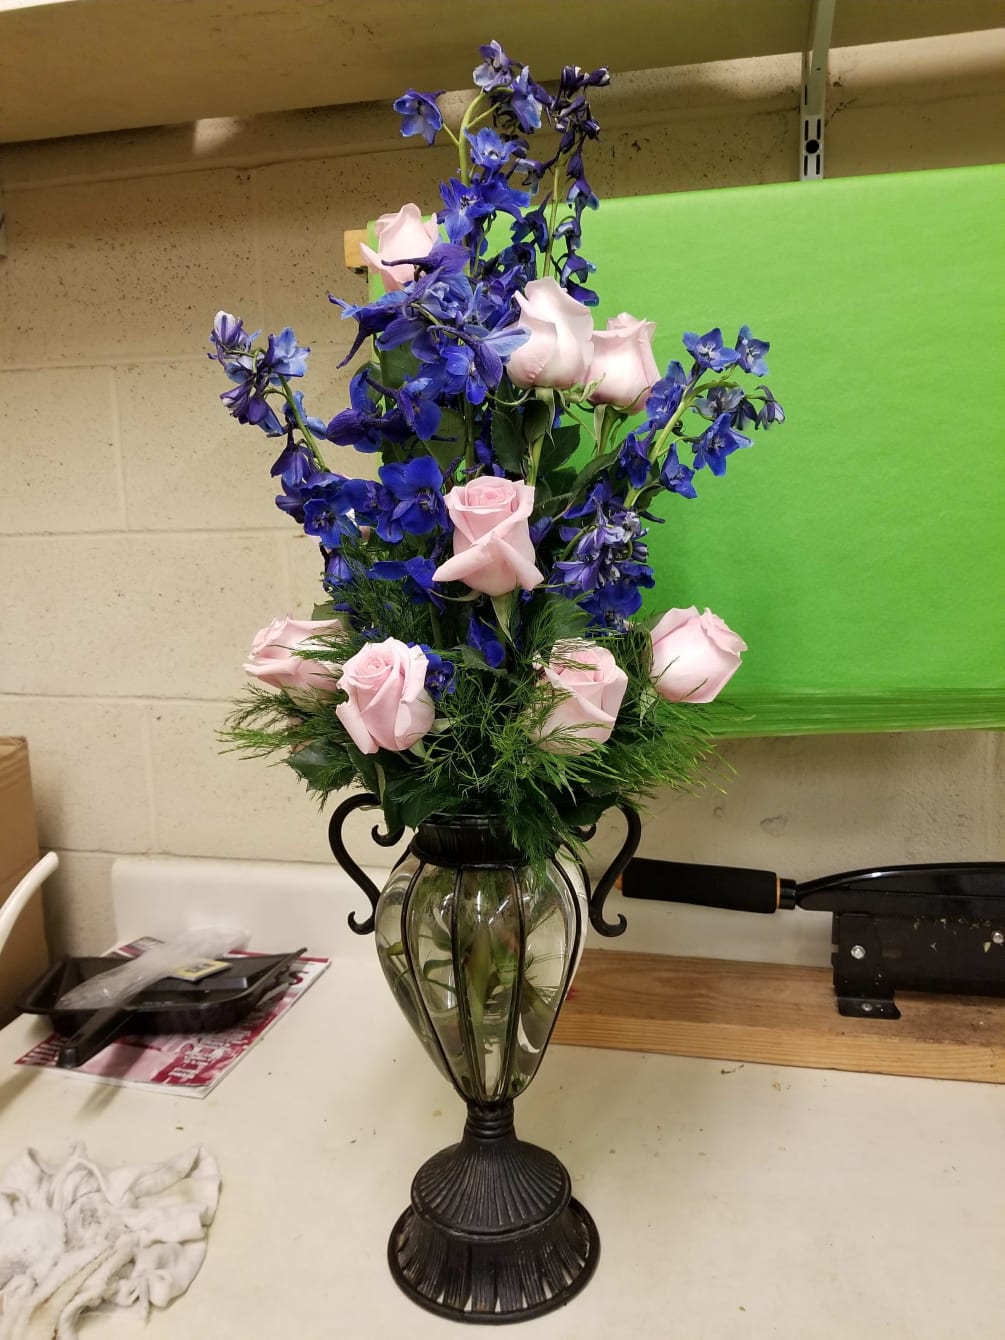 12 light pink roses and 9 blue delphinium. Vase will vary.